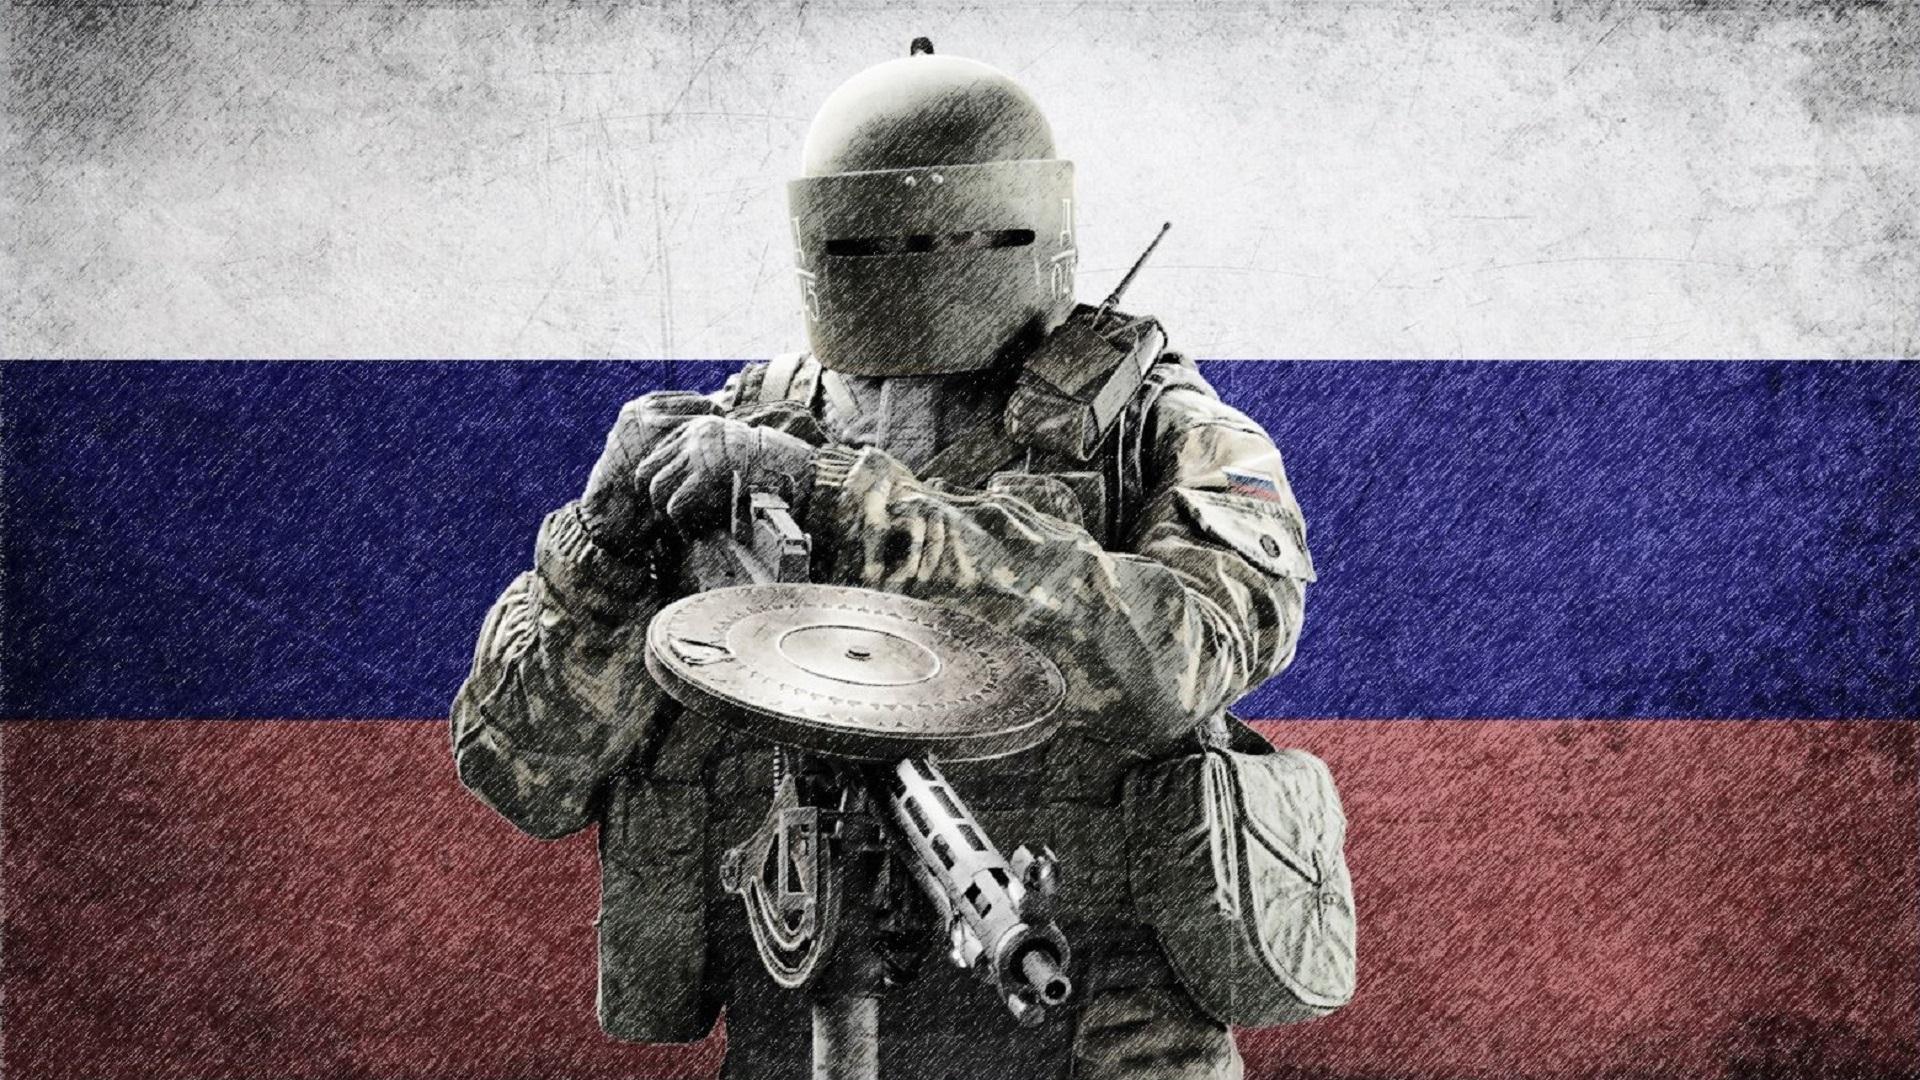 I made a Tachanka themed wallpaper, what do you think?